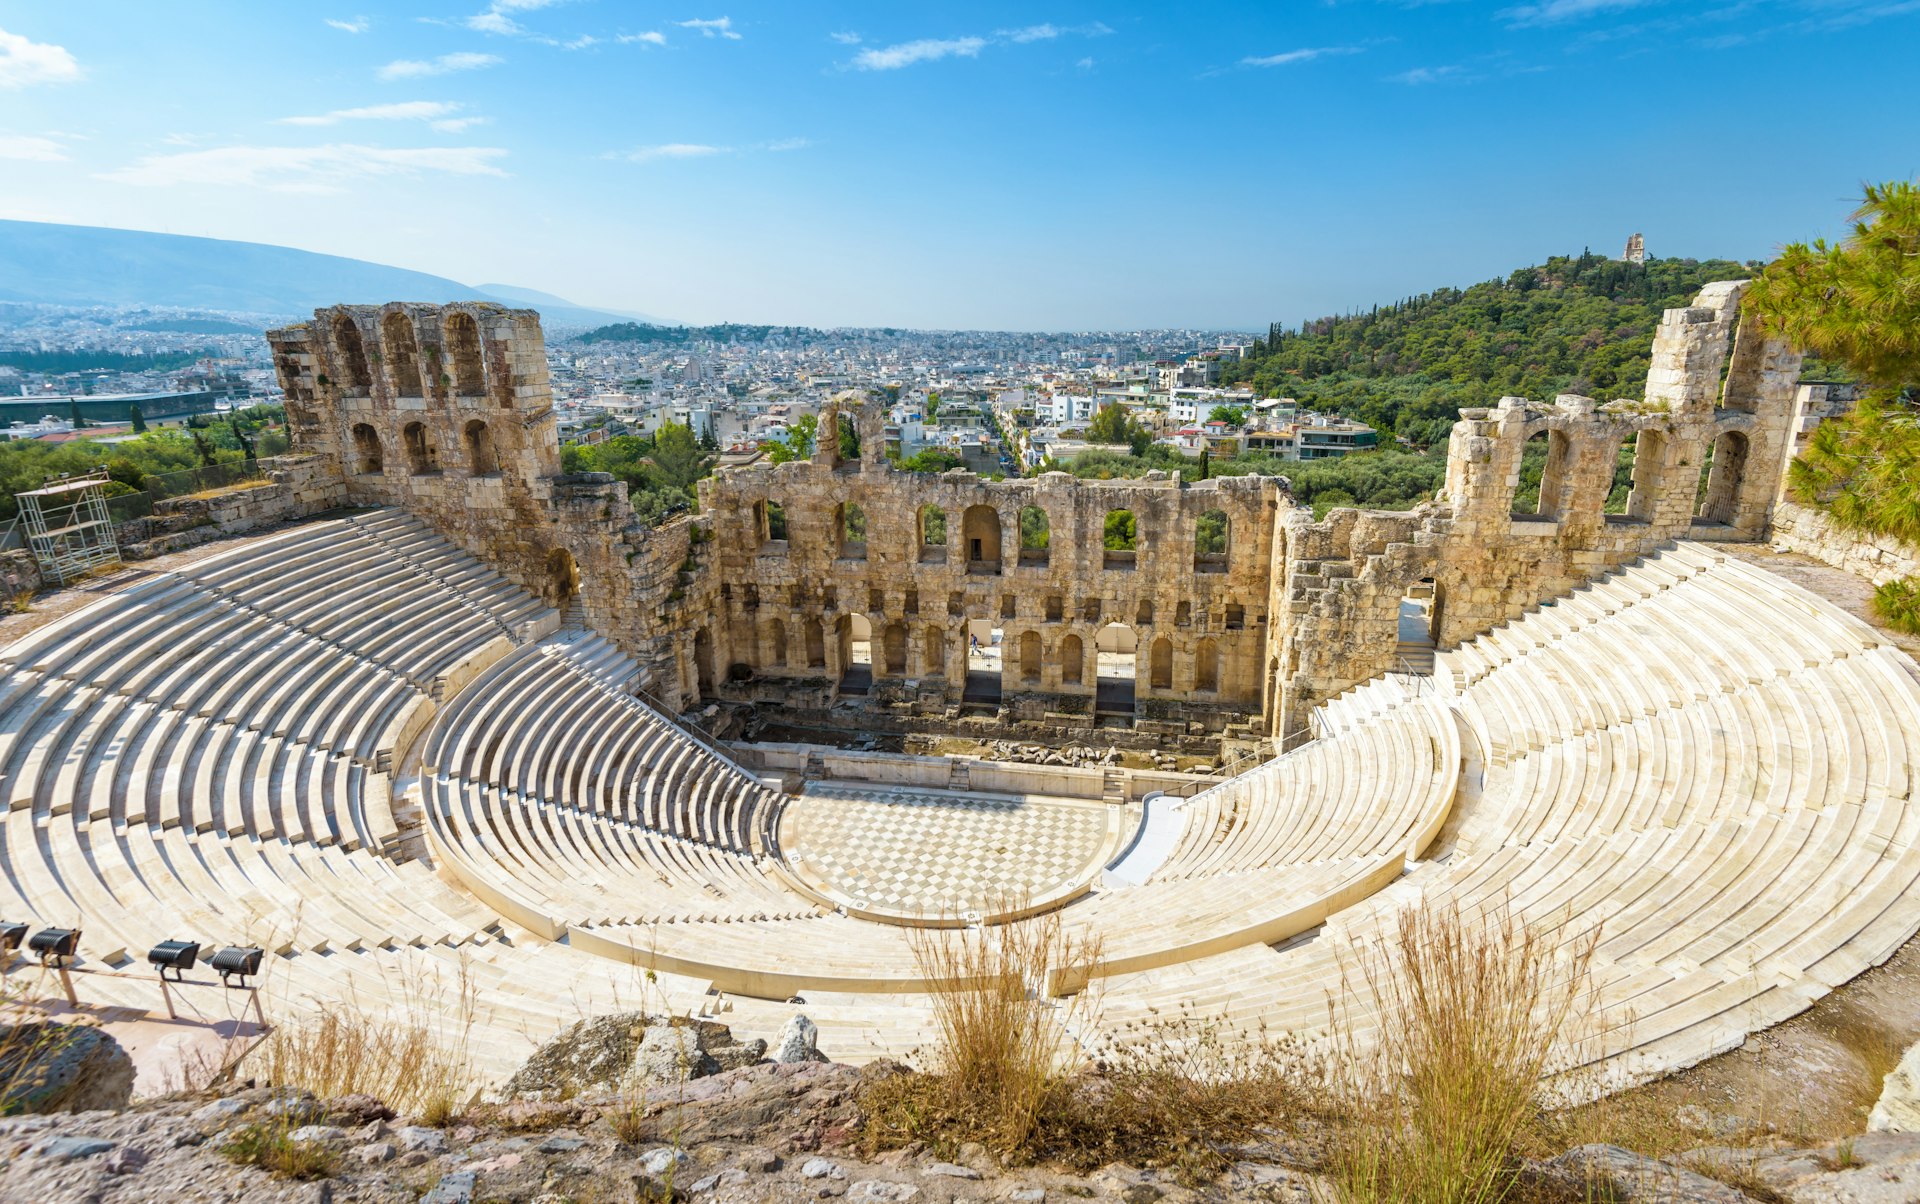 Panoramic view of the Odeon of Herodes Atticus at the Acropolis of Athens, Greece.